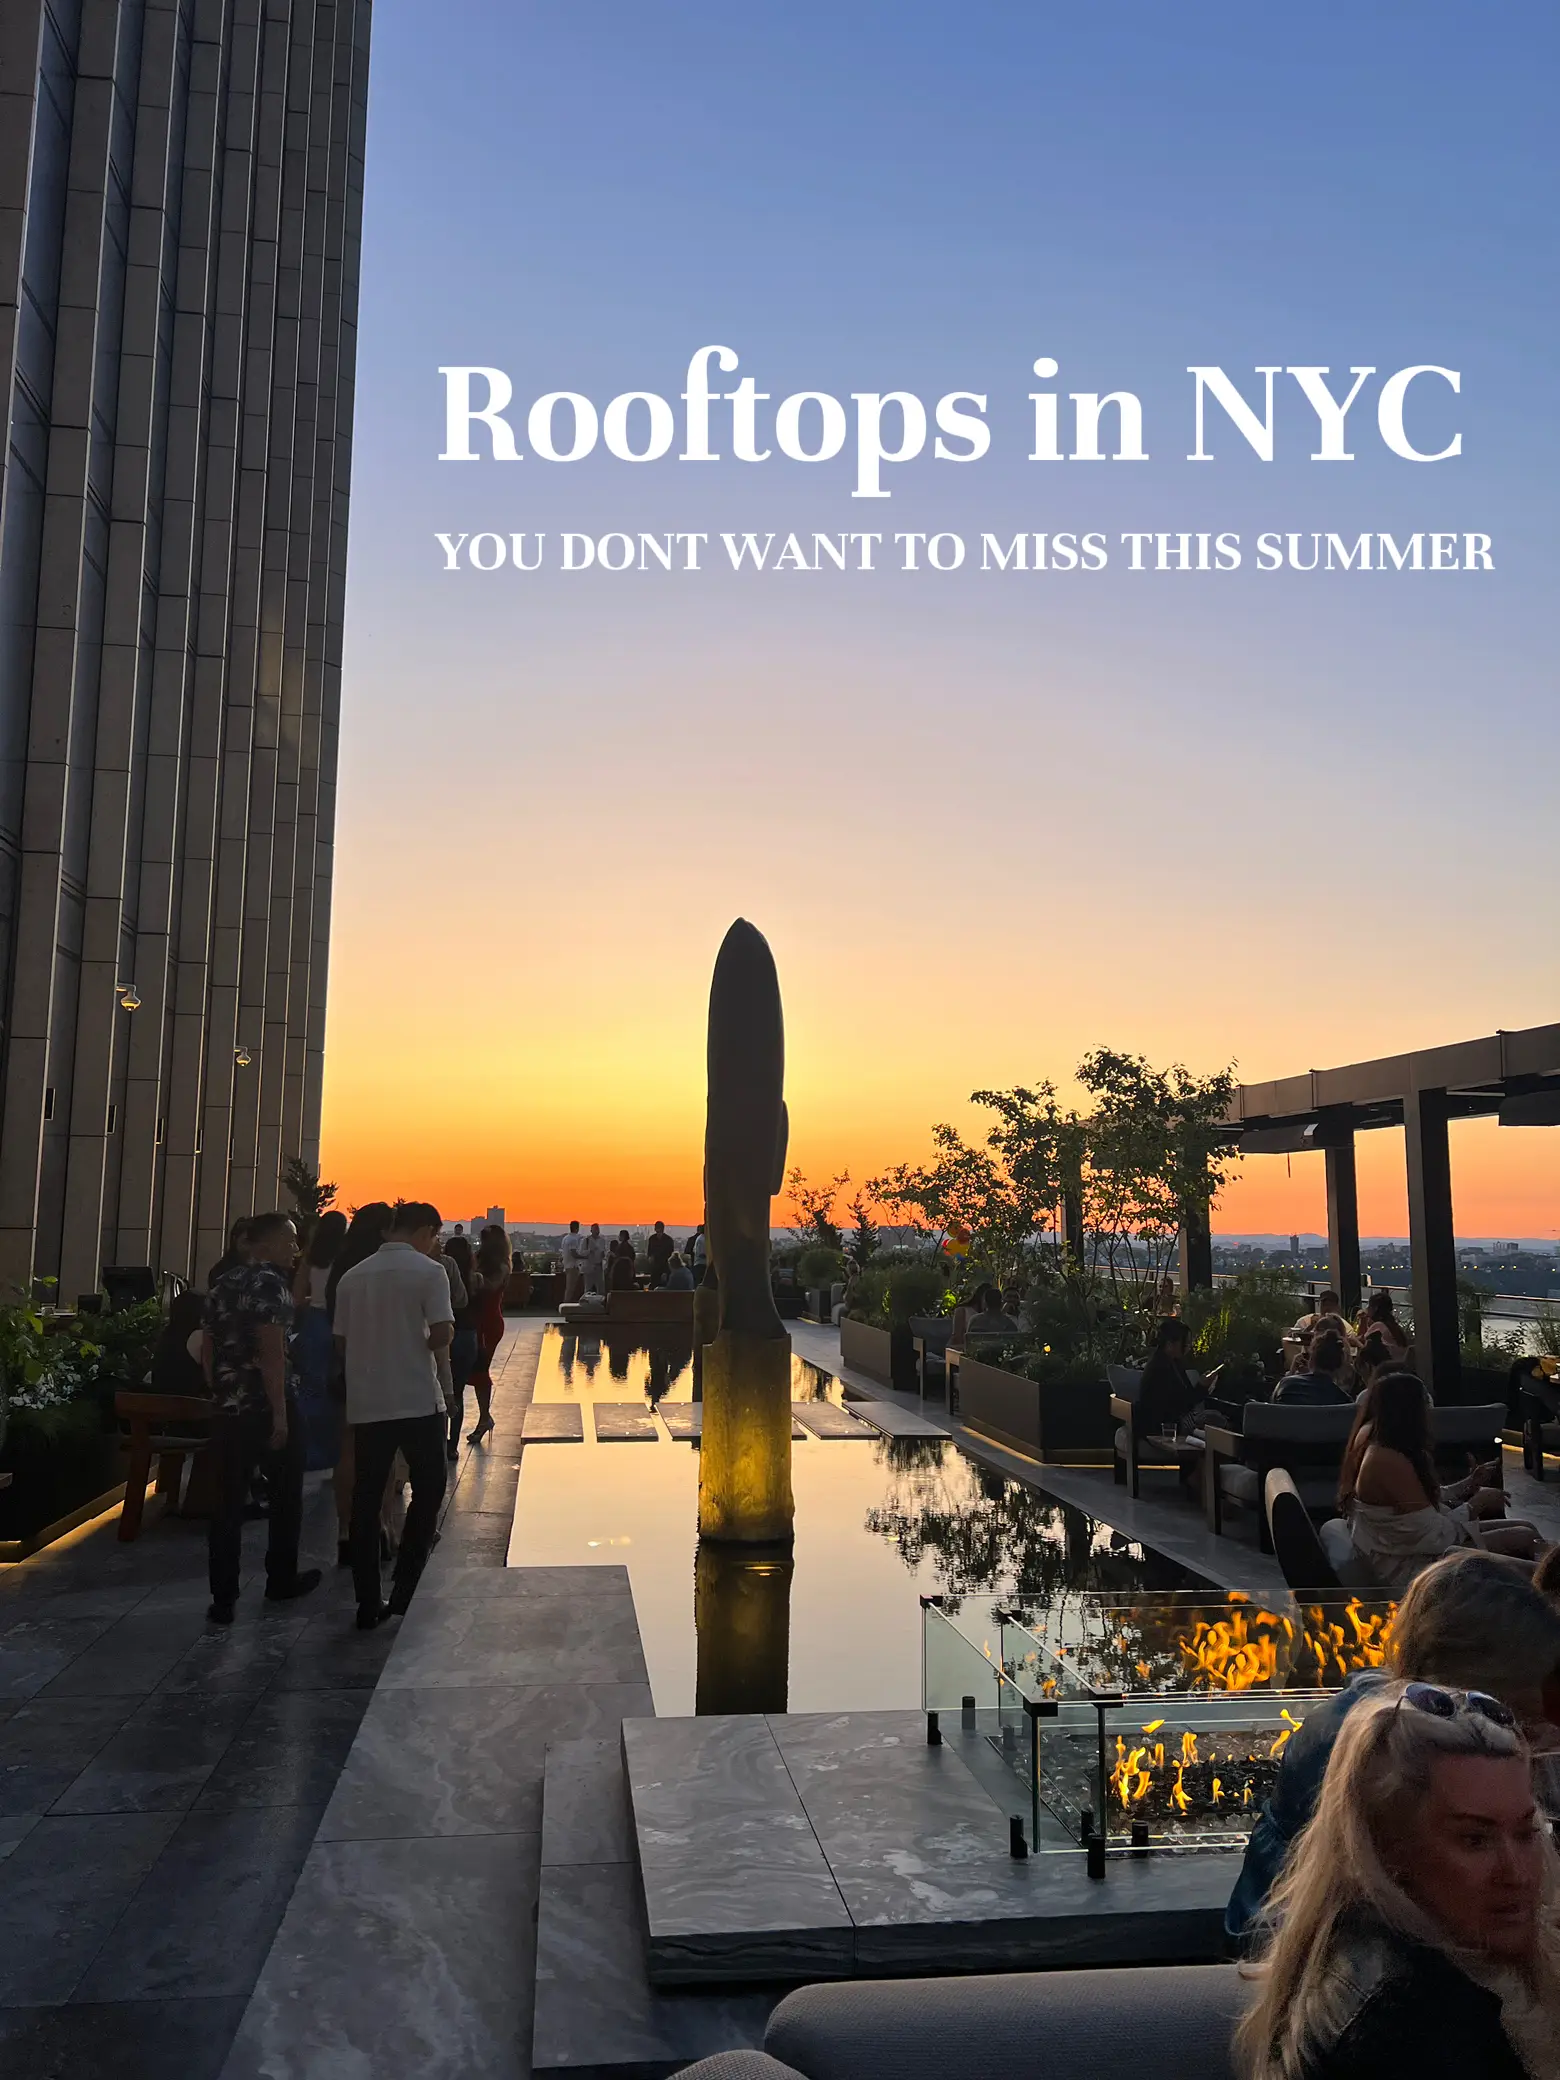 Add this to your NYC Summer Bucketlist! ☀️'s images